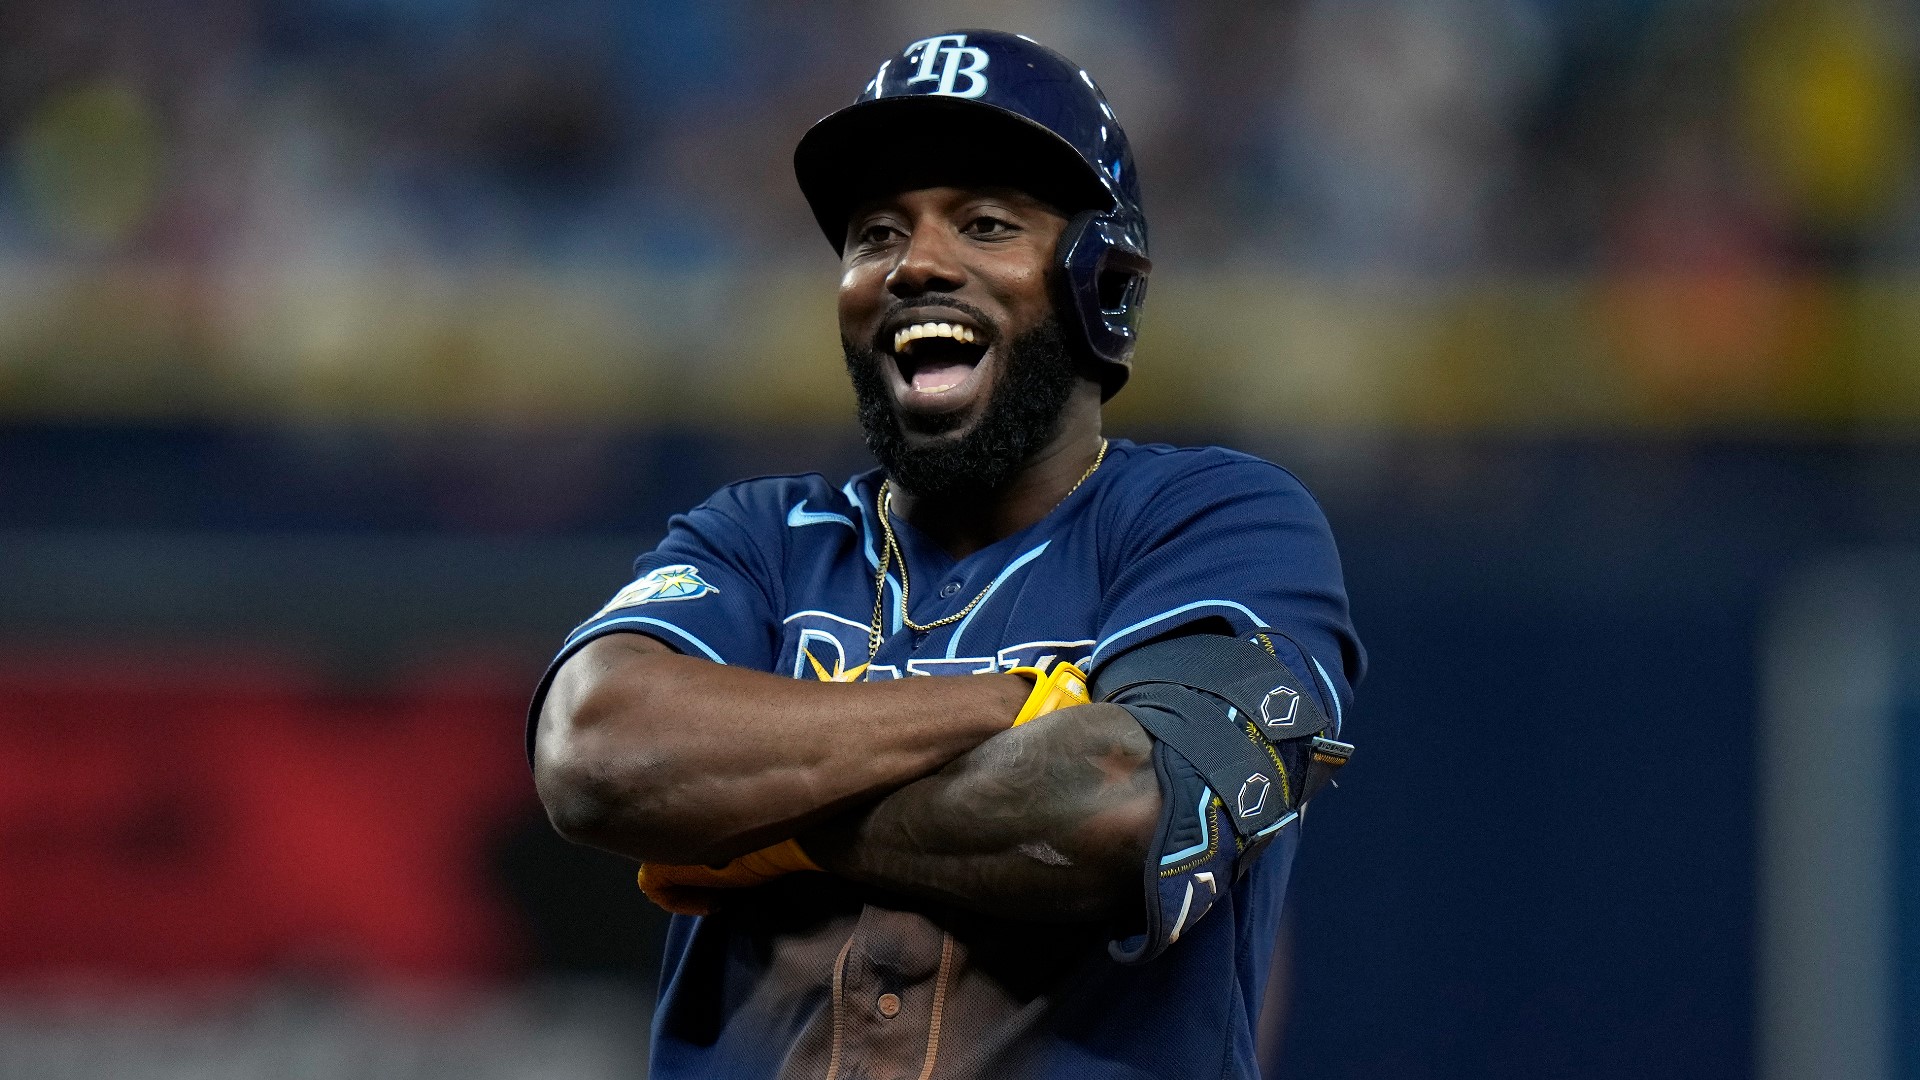 10 Tampa Bay Sports Director Evan Closky previews the Rays season as the team prepares to play the Blue Jays this afternoon at Tropicana Field.